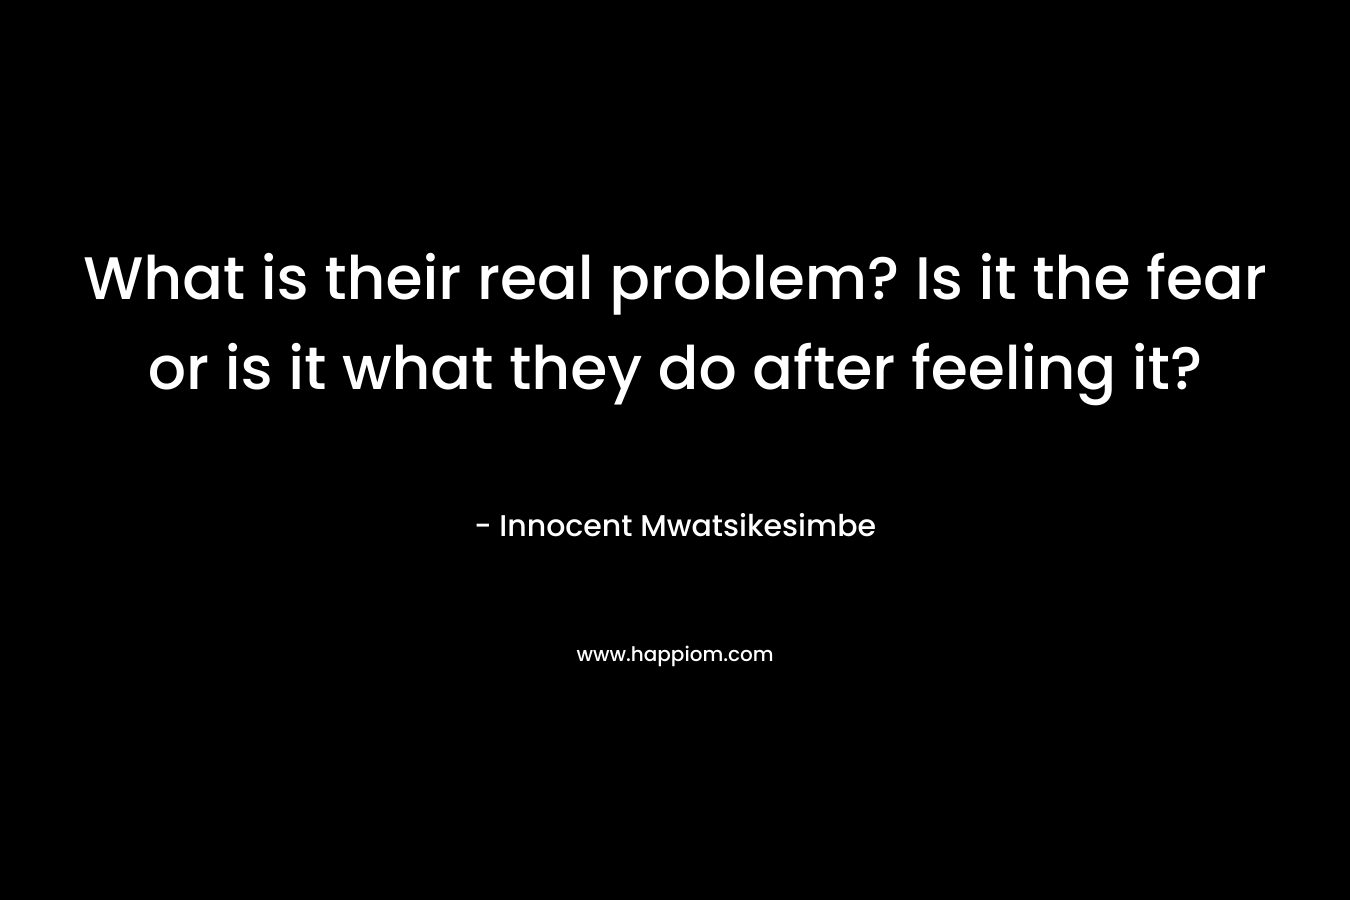 What is their real problem? Is it the fear or is it what they do after feeling it?